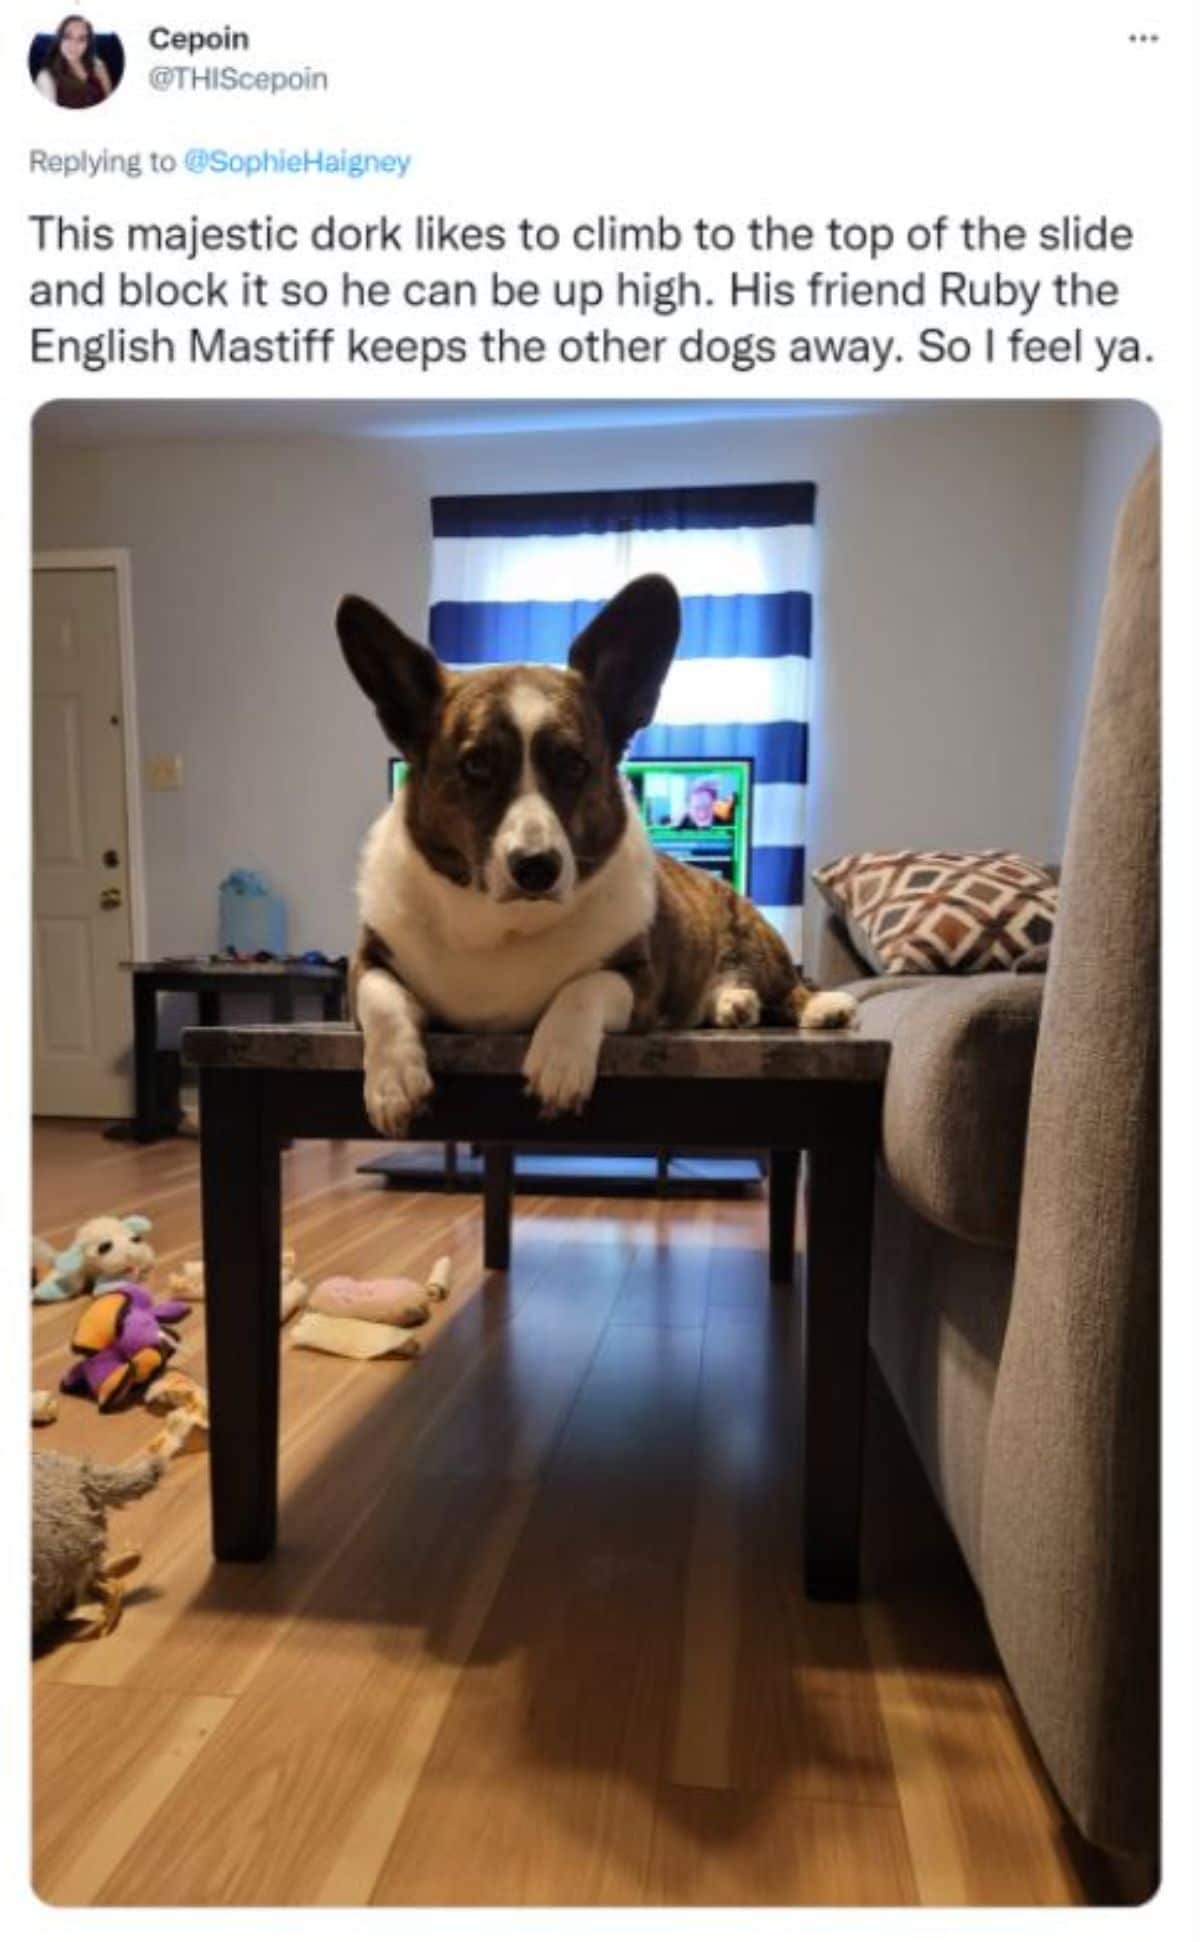 a tweet with a photo of a brown and white dog on a table saying he likes to climb on top of things to be up high